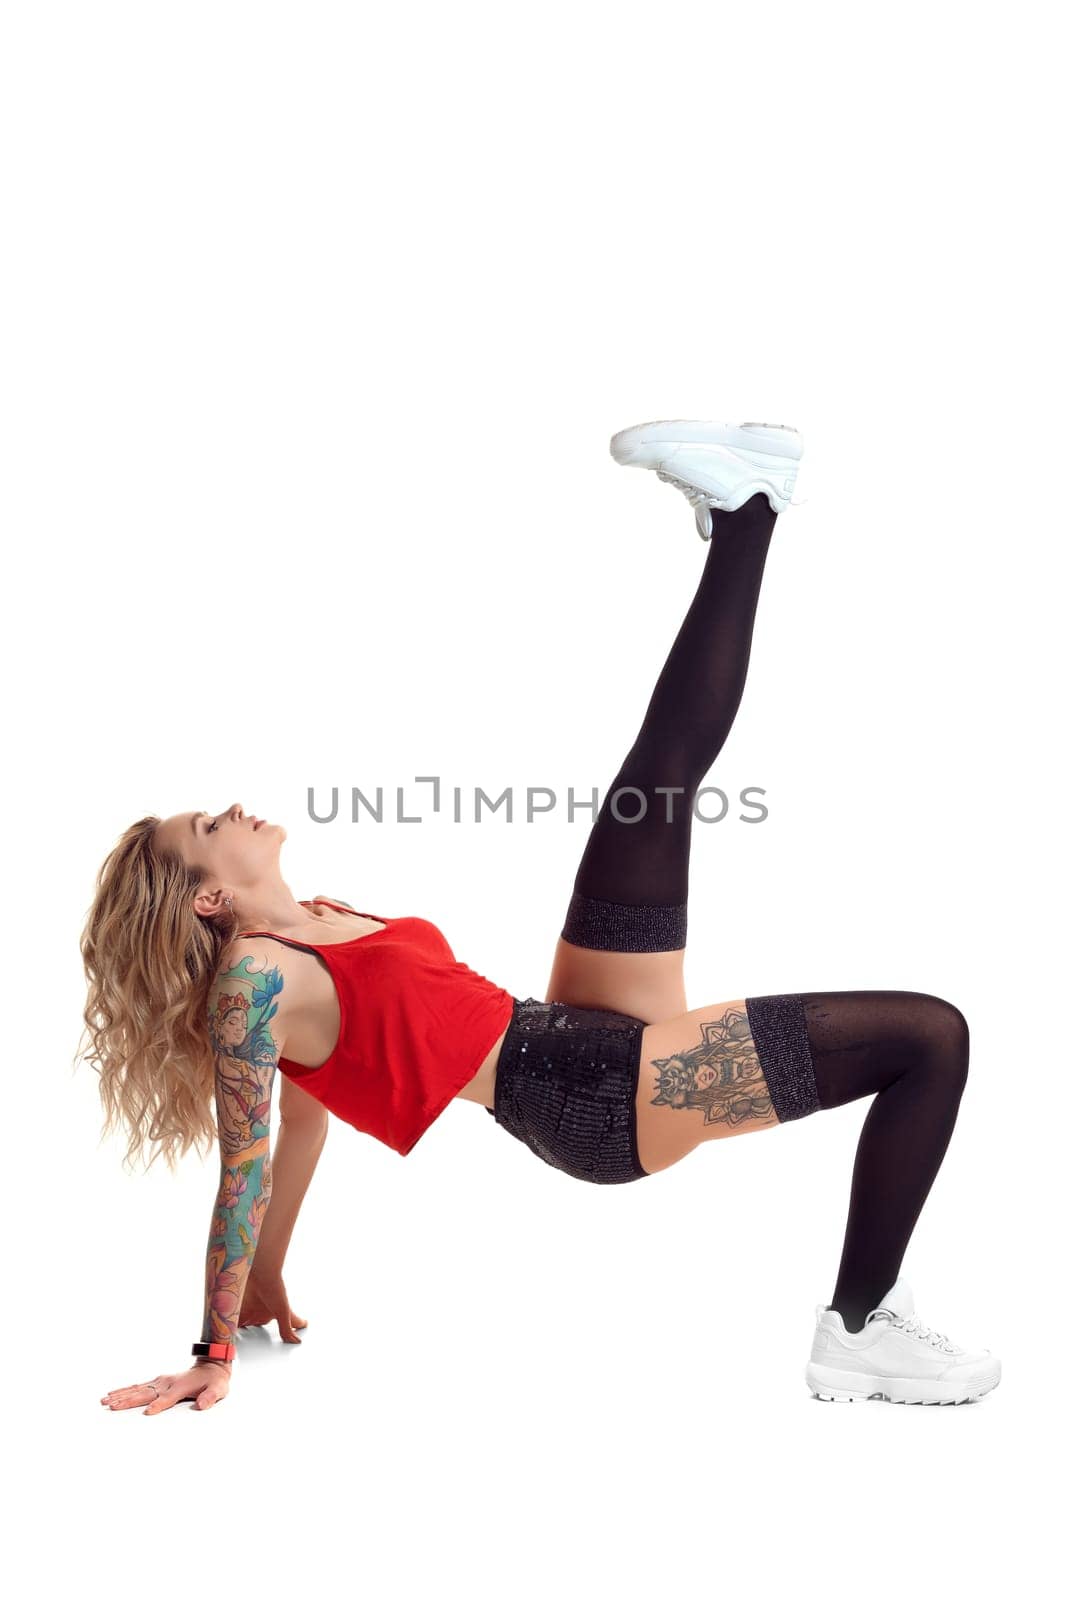 Gorgeous blond female with tattoed body and long curly hair is looking up while posing isolated on white background with copy space. Young woman wearing in a black stockings and mini shorts, red top and white sneakers. Booty twerk dance in studio.